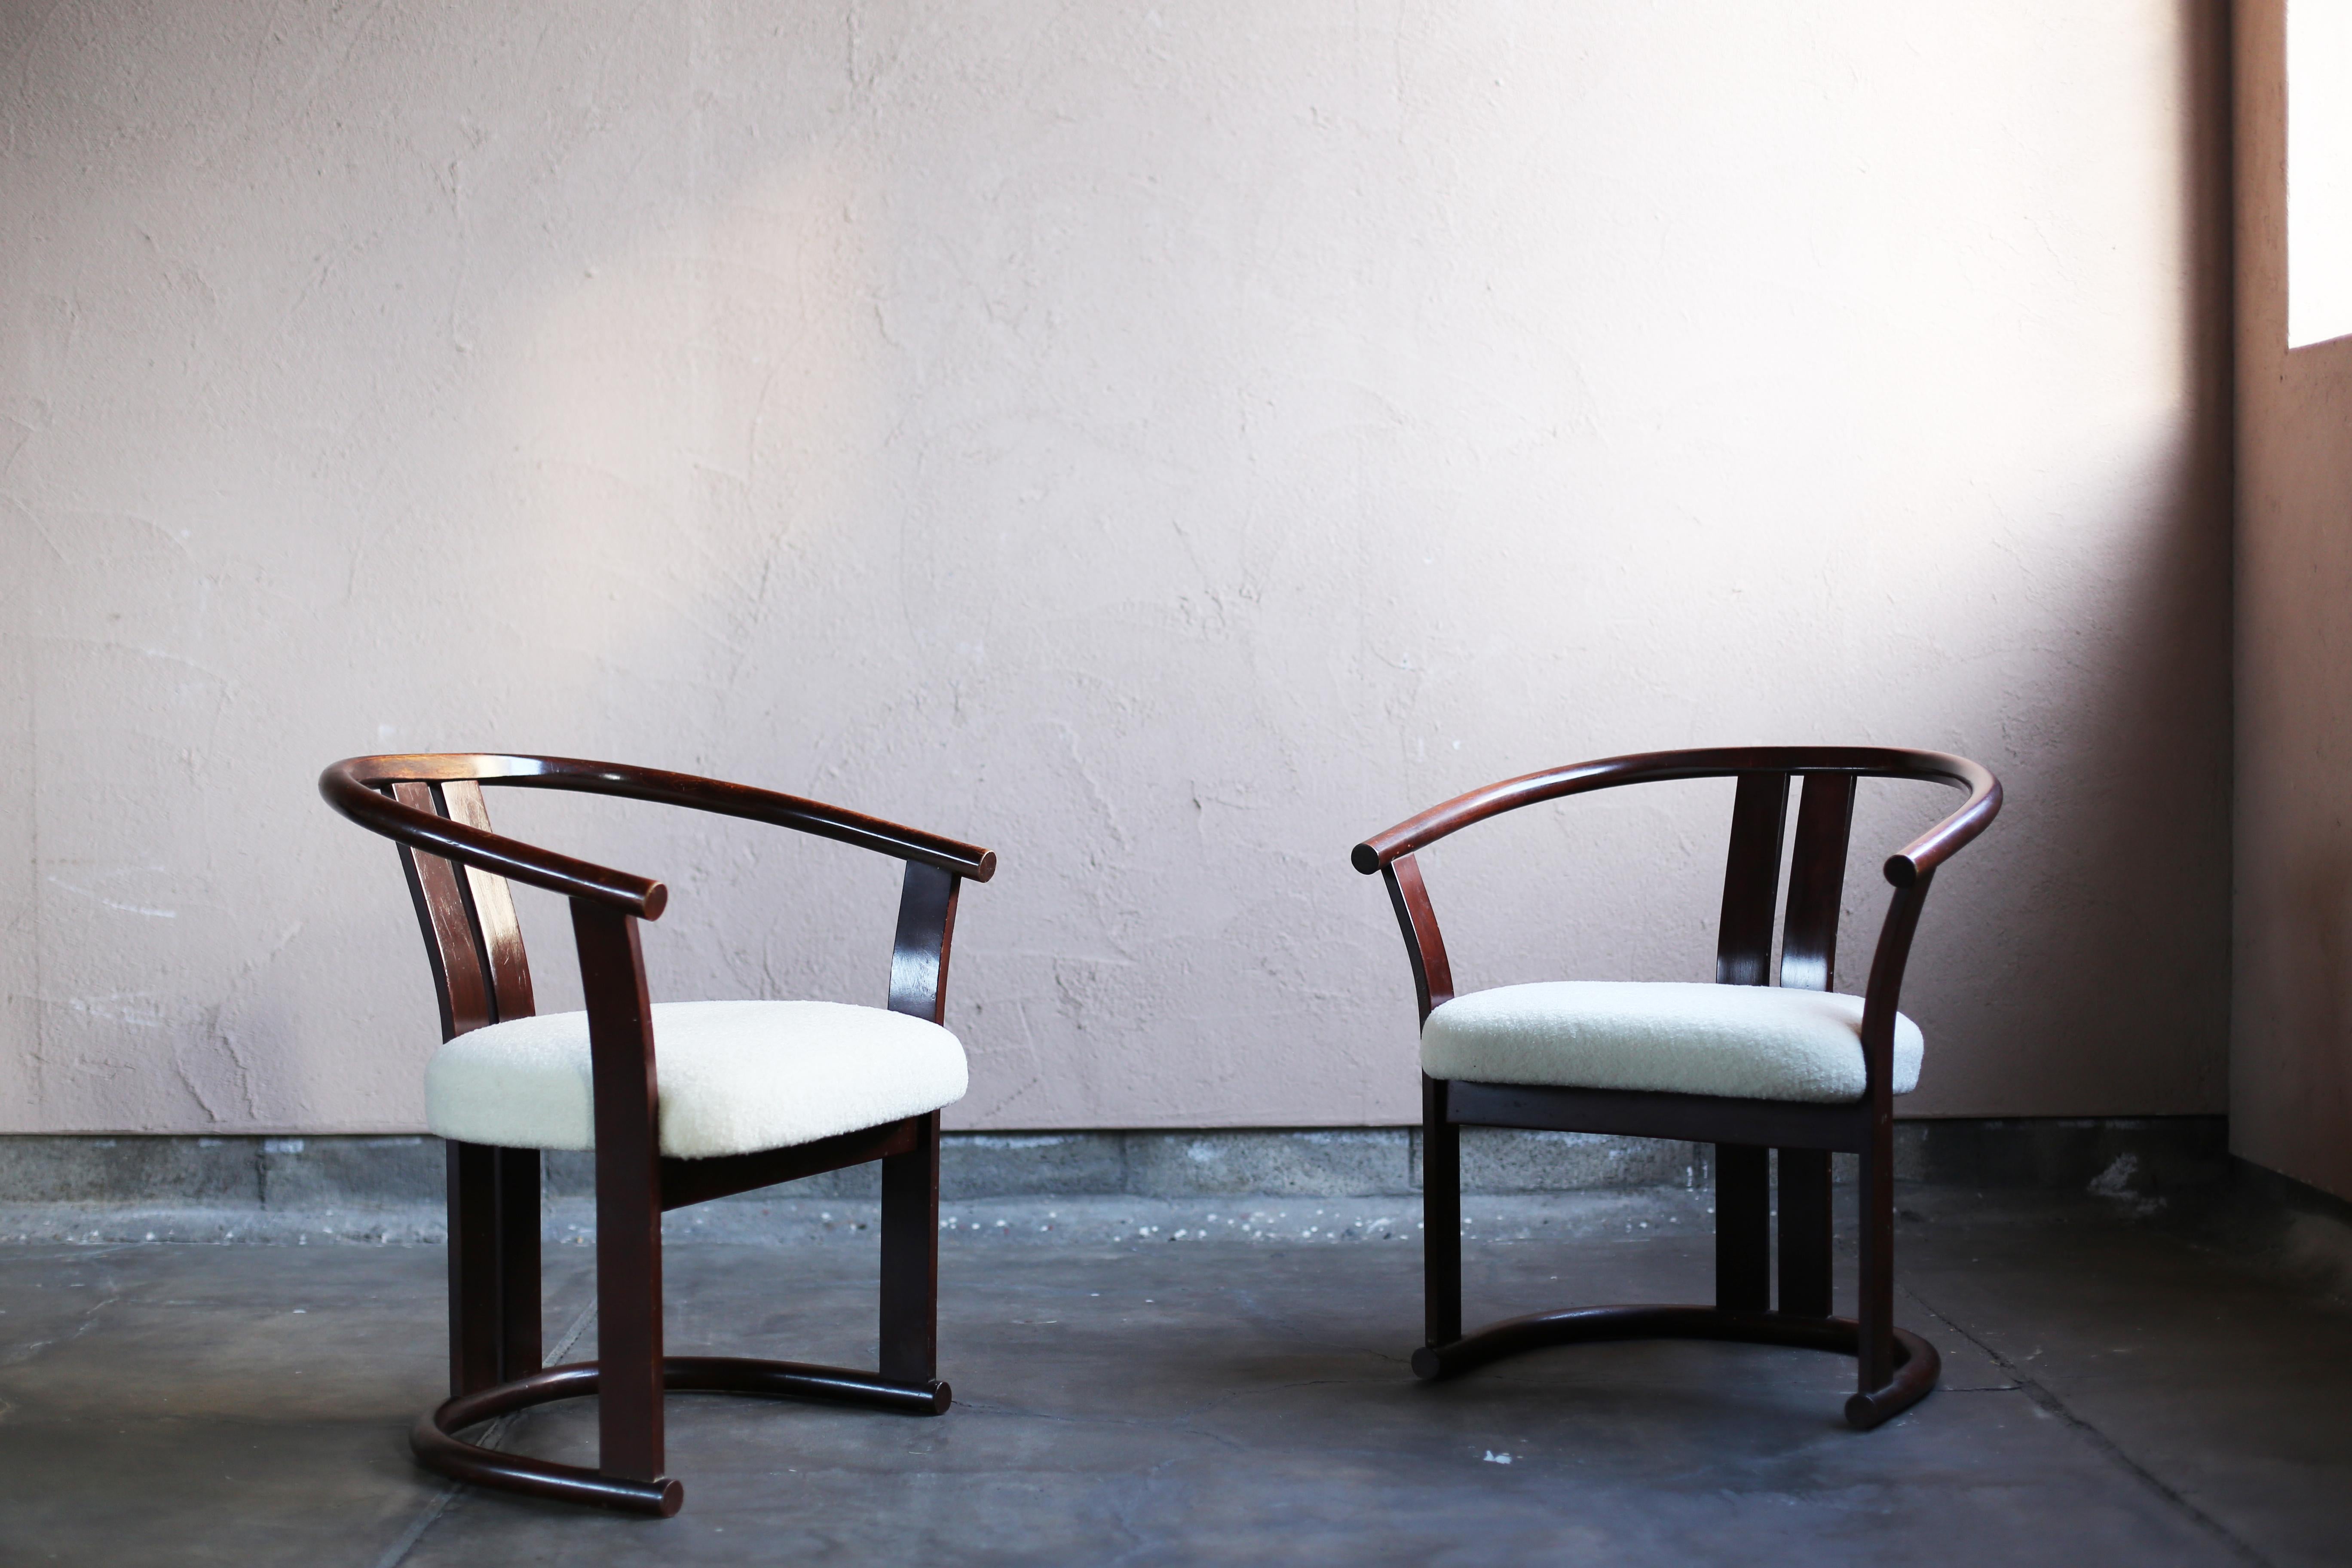 These are 60s-70s chairs designed by Isamu Kenmochi for Akita Mokkou. The original stickers still exist.
All frames are made of bent solid beech wood.
Akita Mokkou has a history of over 100 years as Japan's only manufacturer specializing in bent